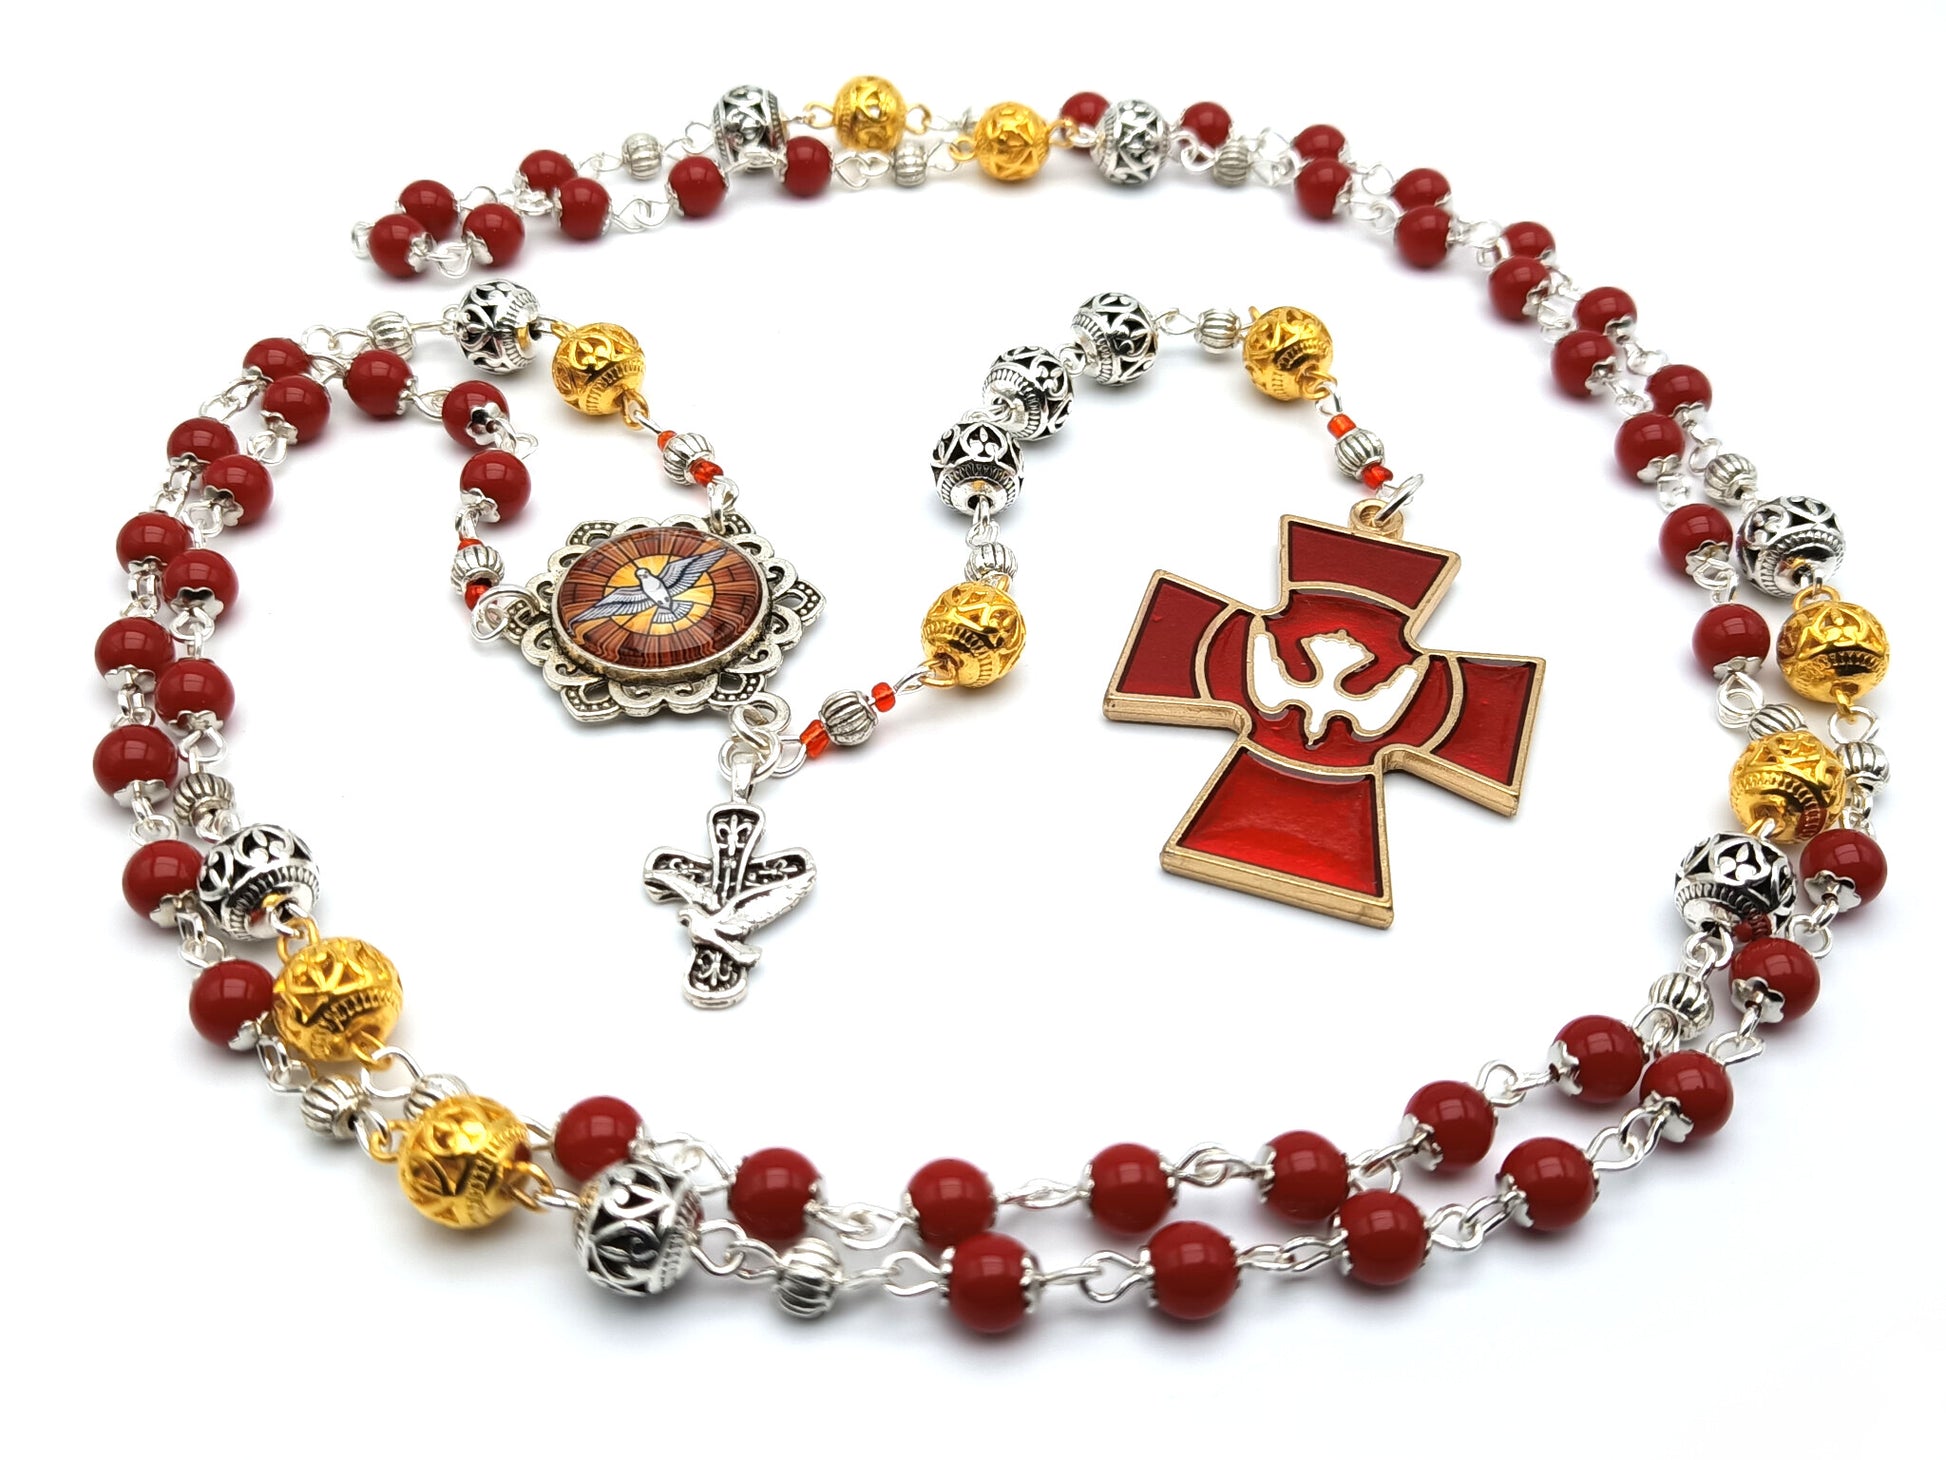 Holy Spirit unique rosary beads prayer chaplet with red porcelain, gold and silver beads, red enamel Holy Spirit crucifix and silver picture medal.